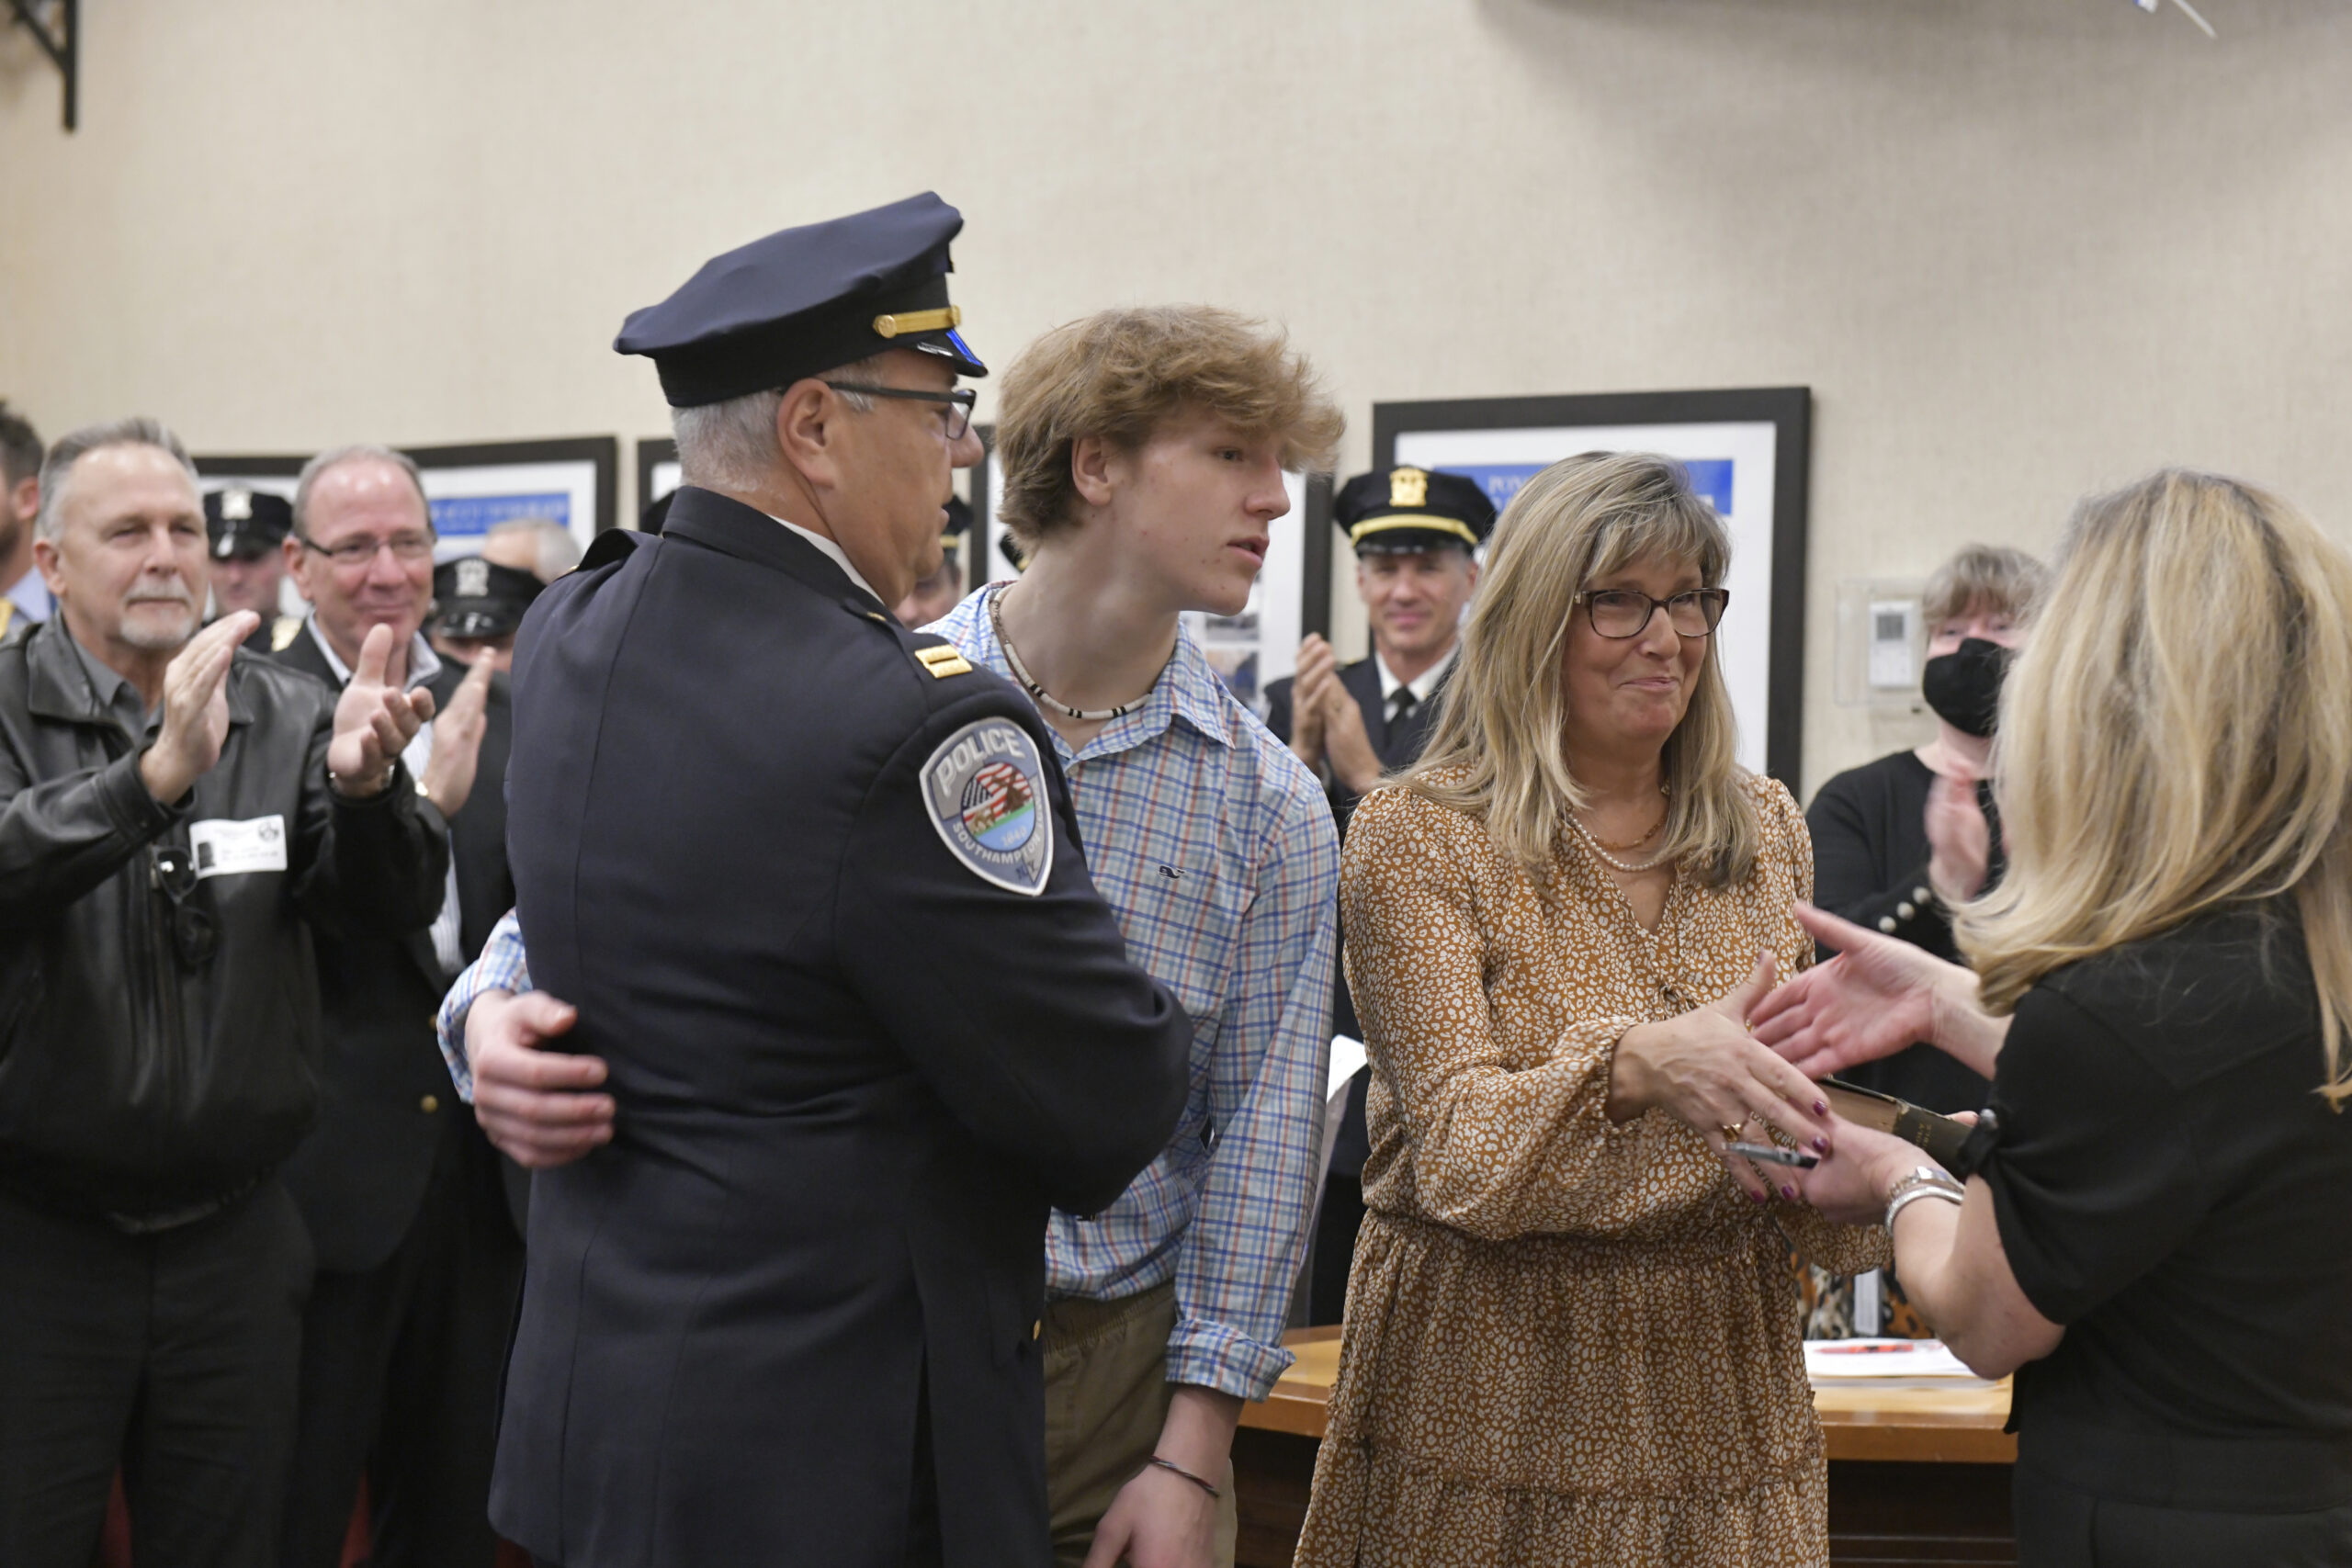 Southampton Town Police Chief James Kiernan is congratulated by his son, Jack, wife Julie and Southampton Town Clerk Sundy Schermeyer.    DANA SHAW